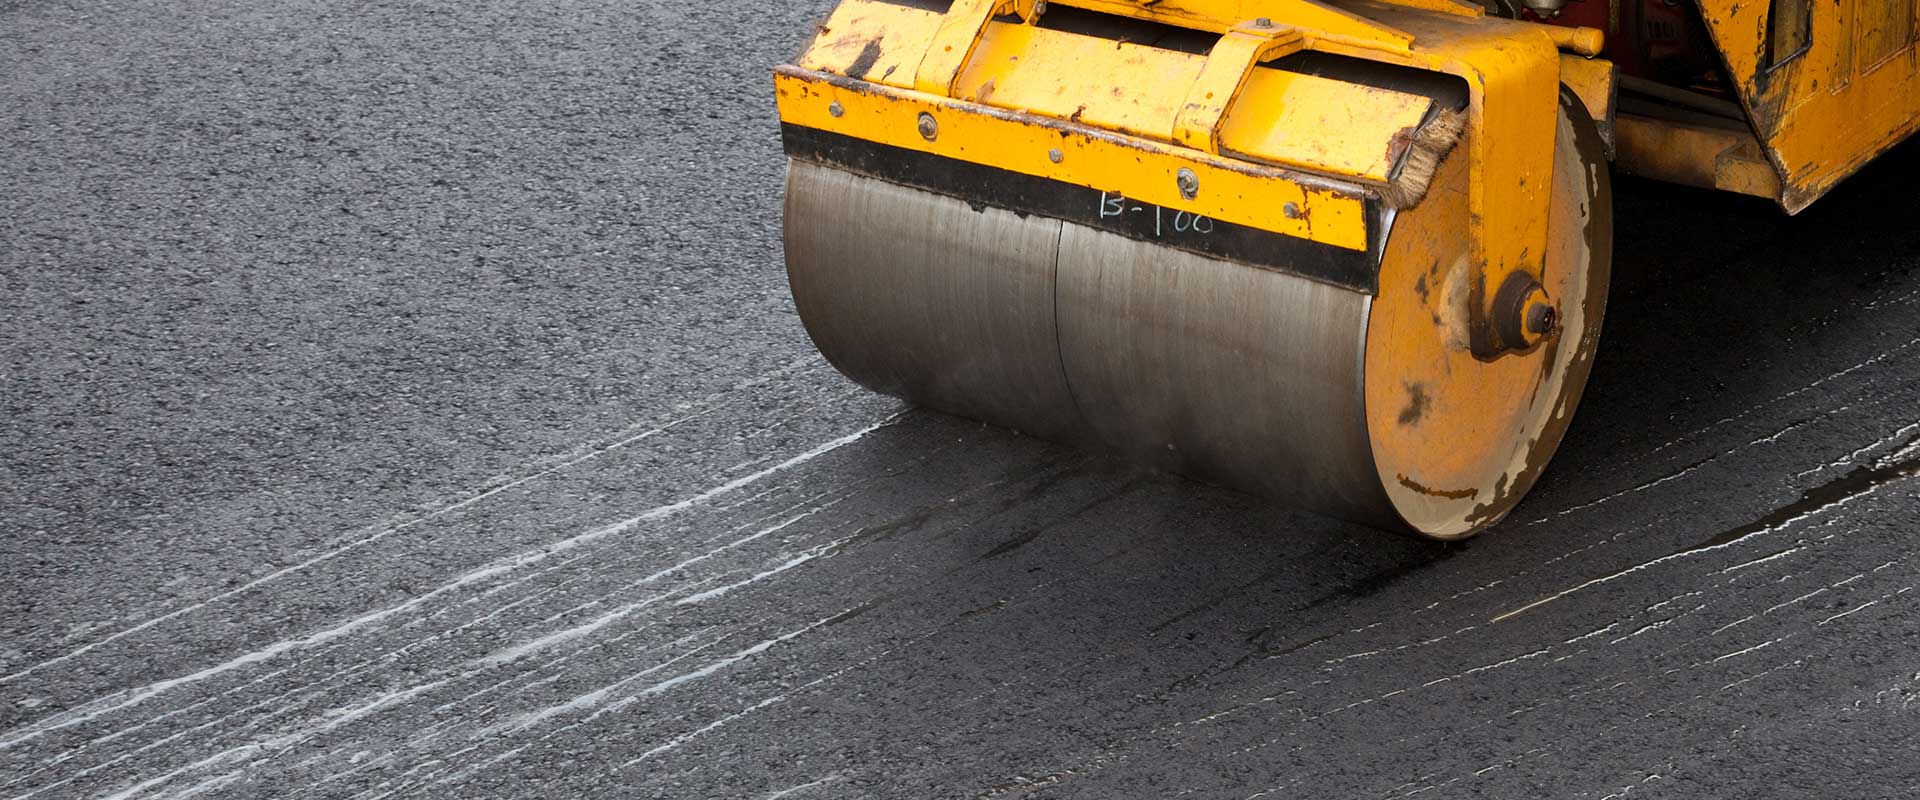 Need Asphalt Work for Your Home or Business?